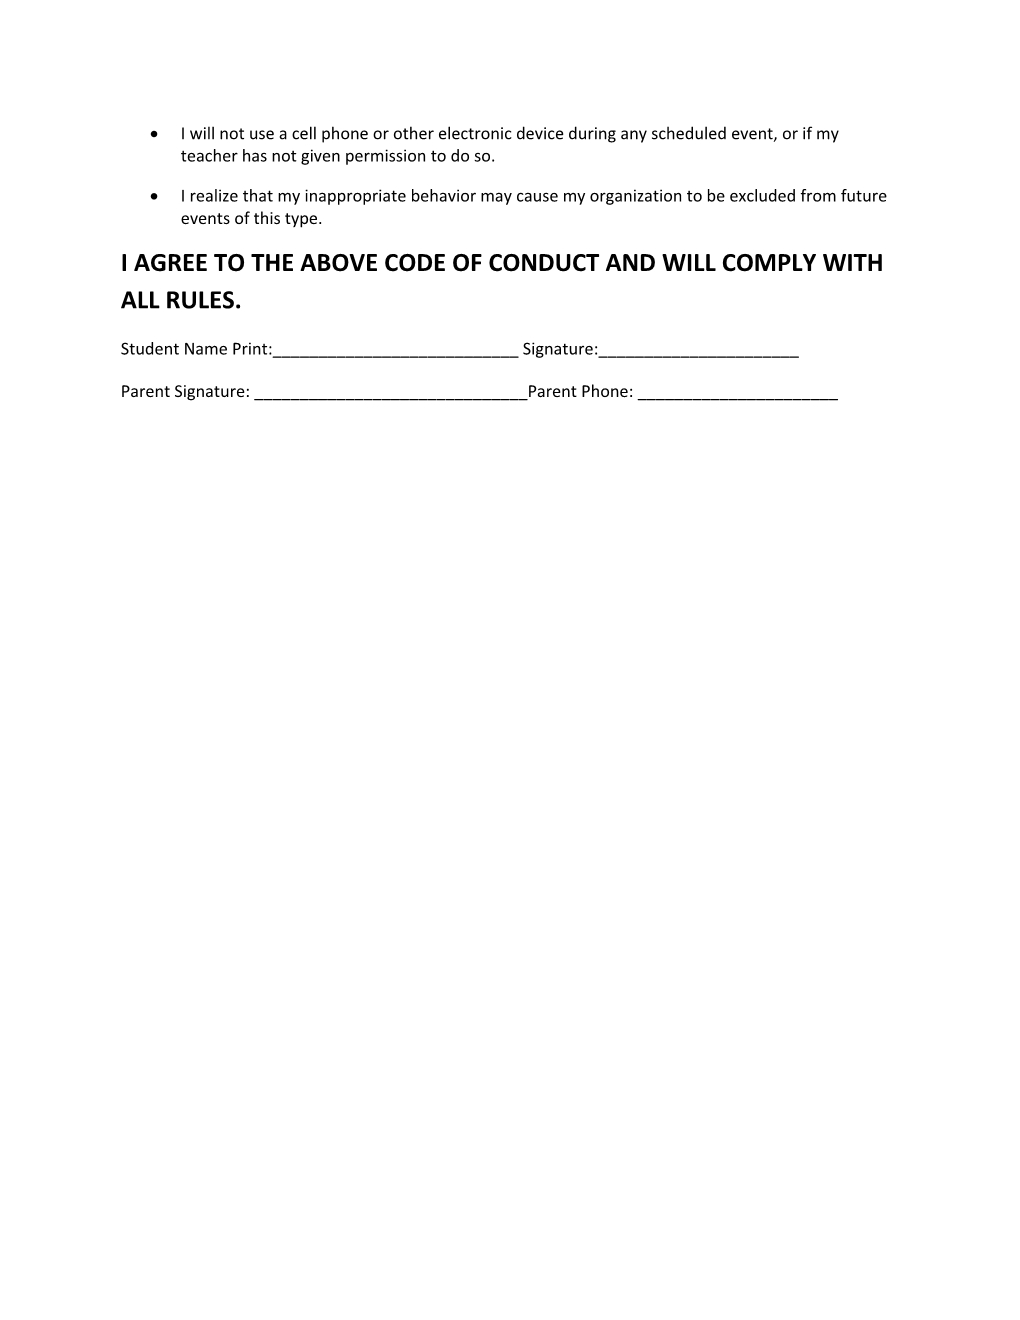 Please READ and Sign This Contract and Return to Your Teacher